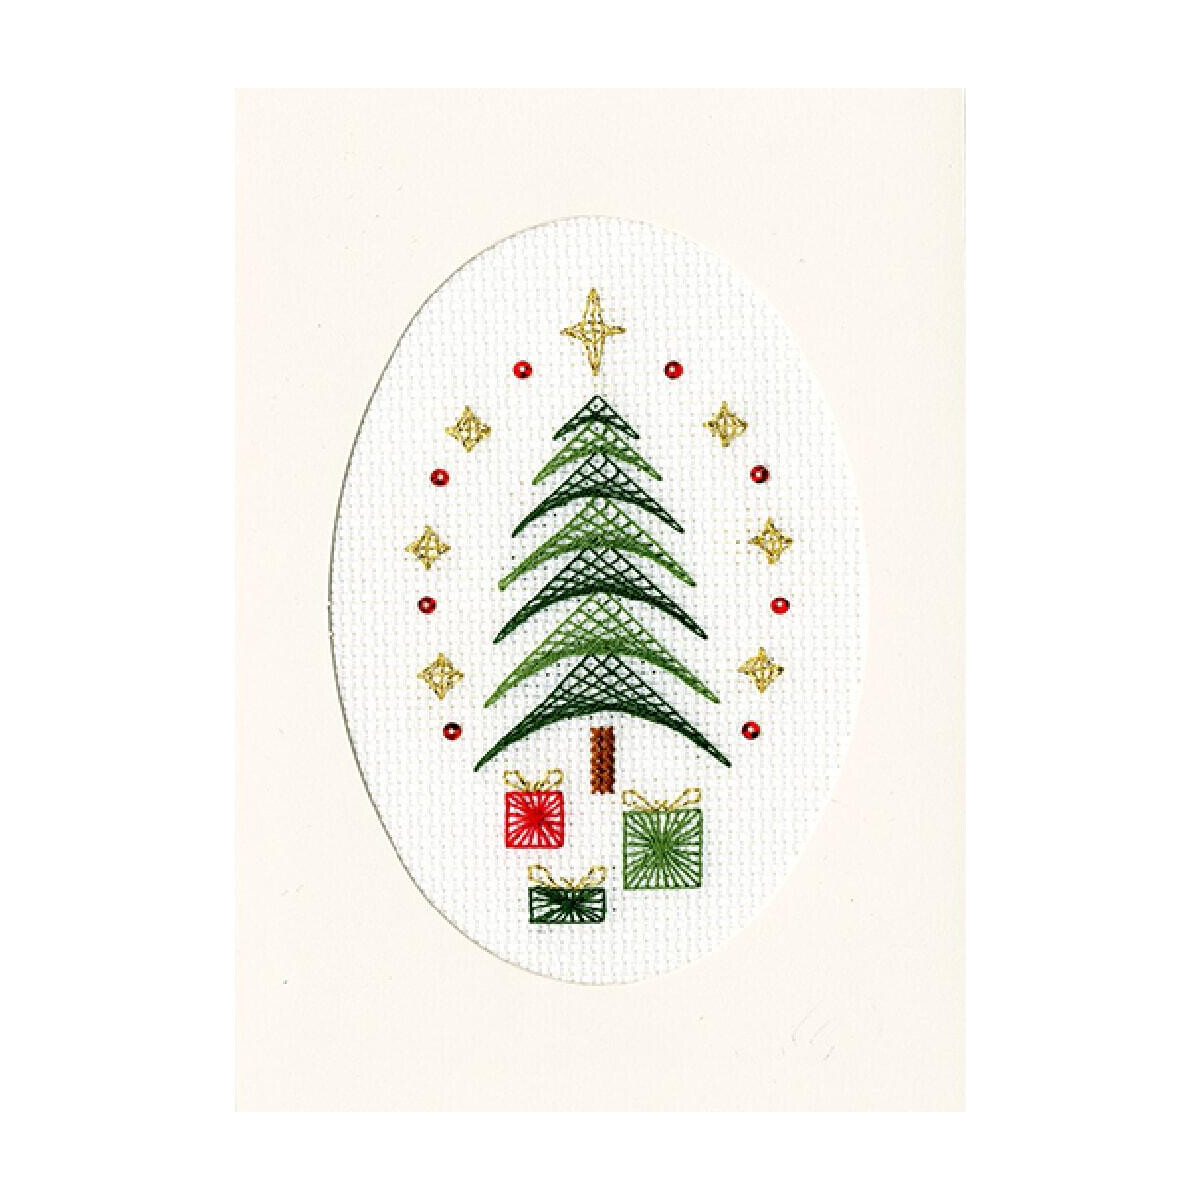 An embroidered Christmas card with a green Christmas tree...